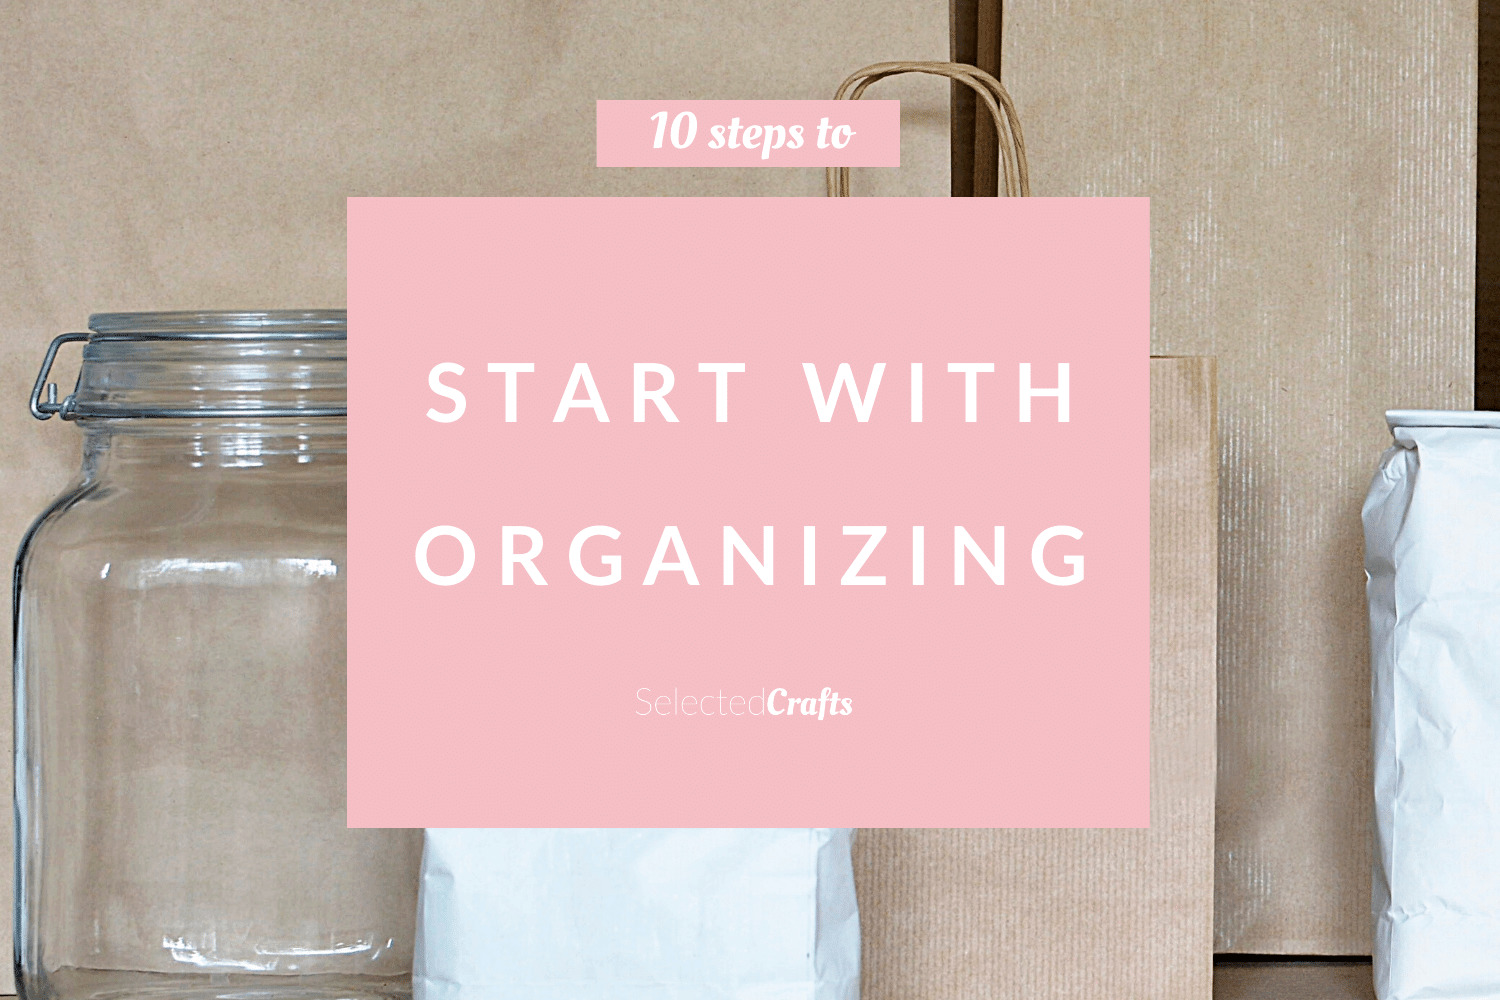 10 steps to start with organizing